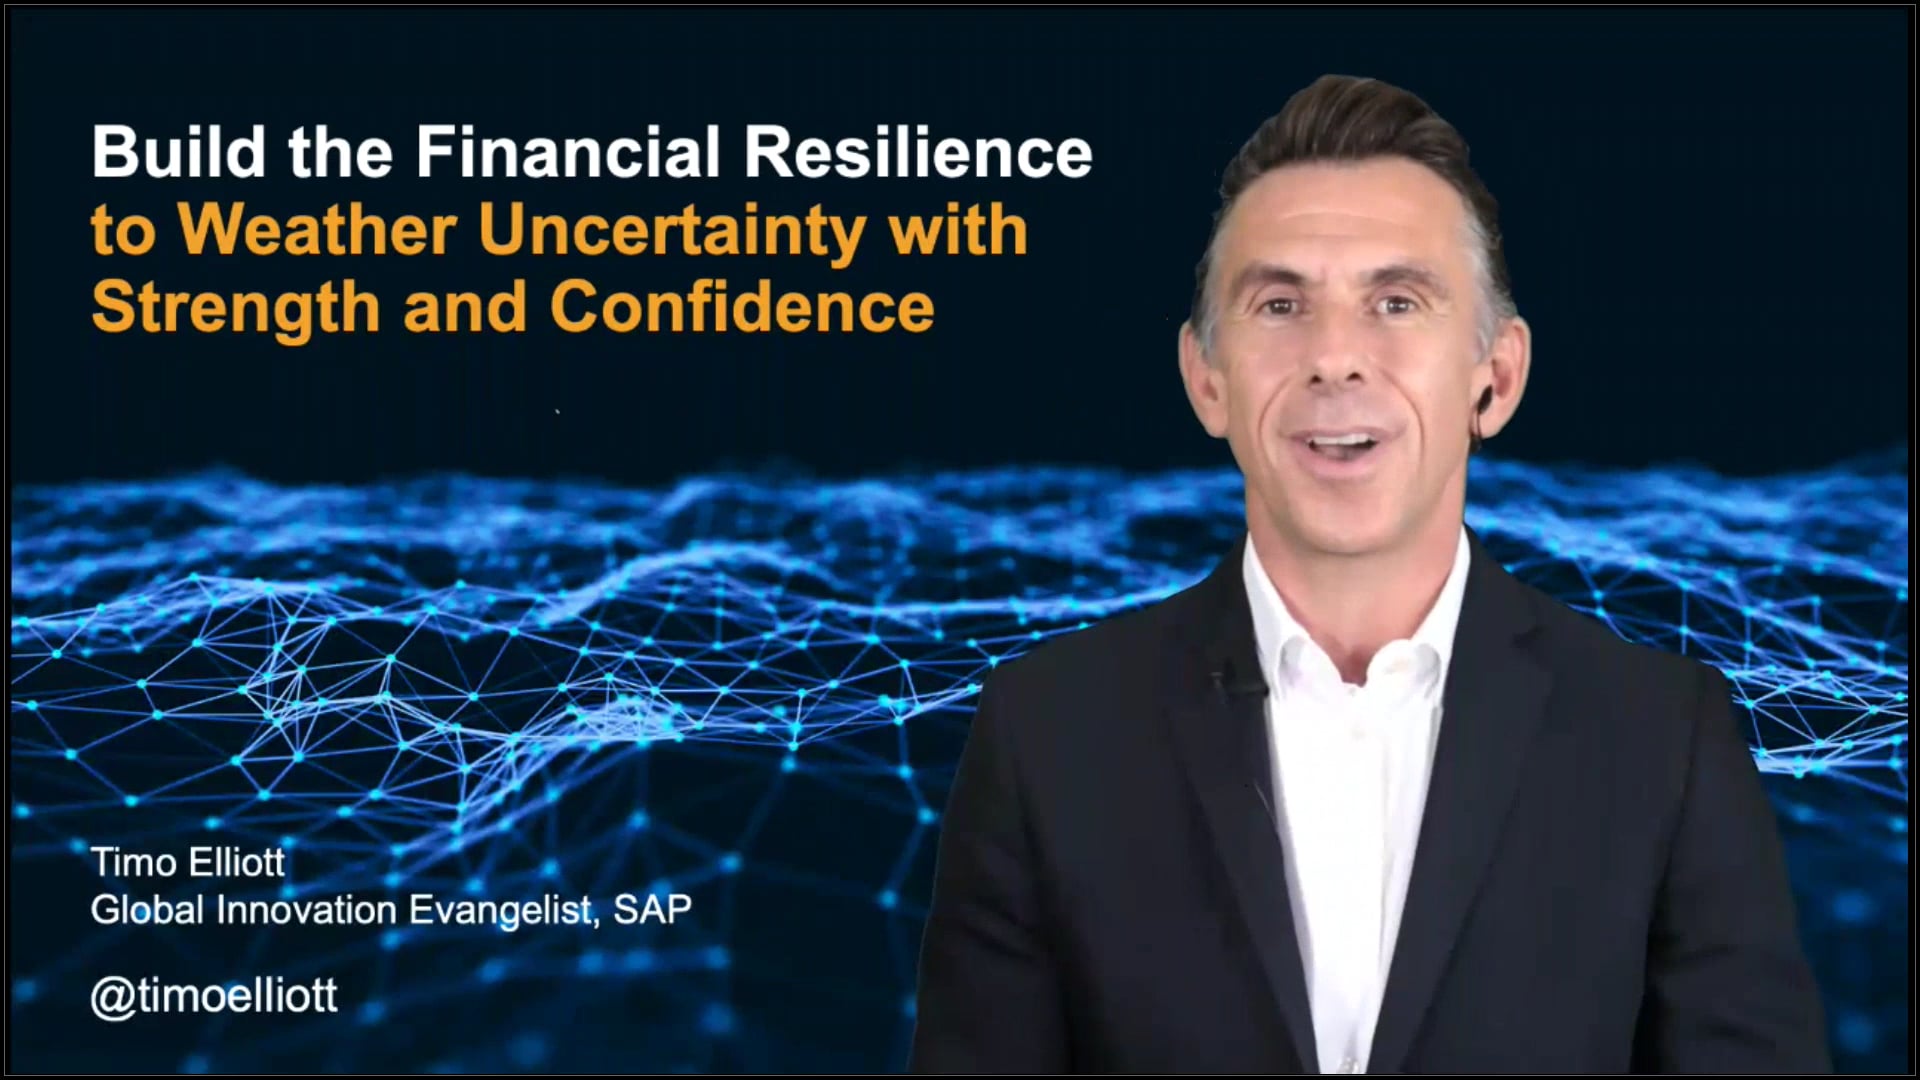 Build the Financial Resilience to Weather Uncertainty with Strength and Confidence